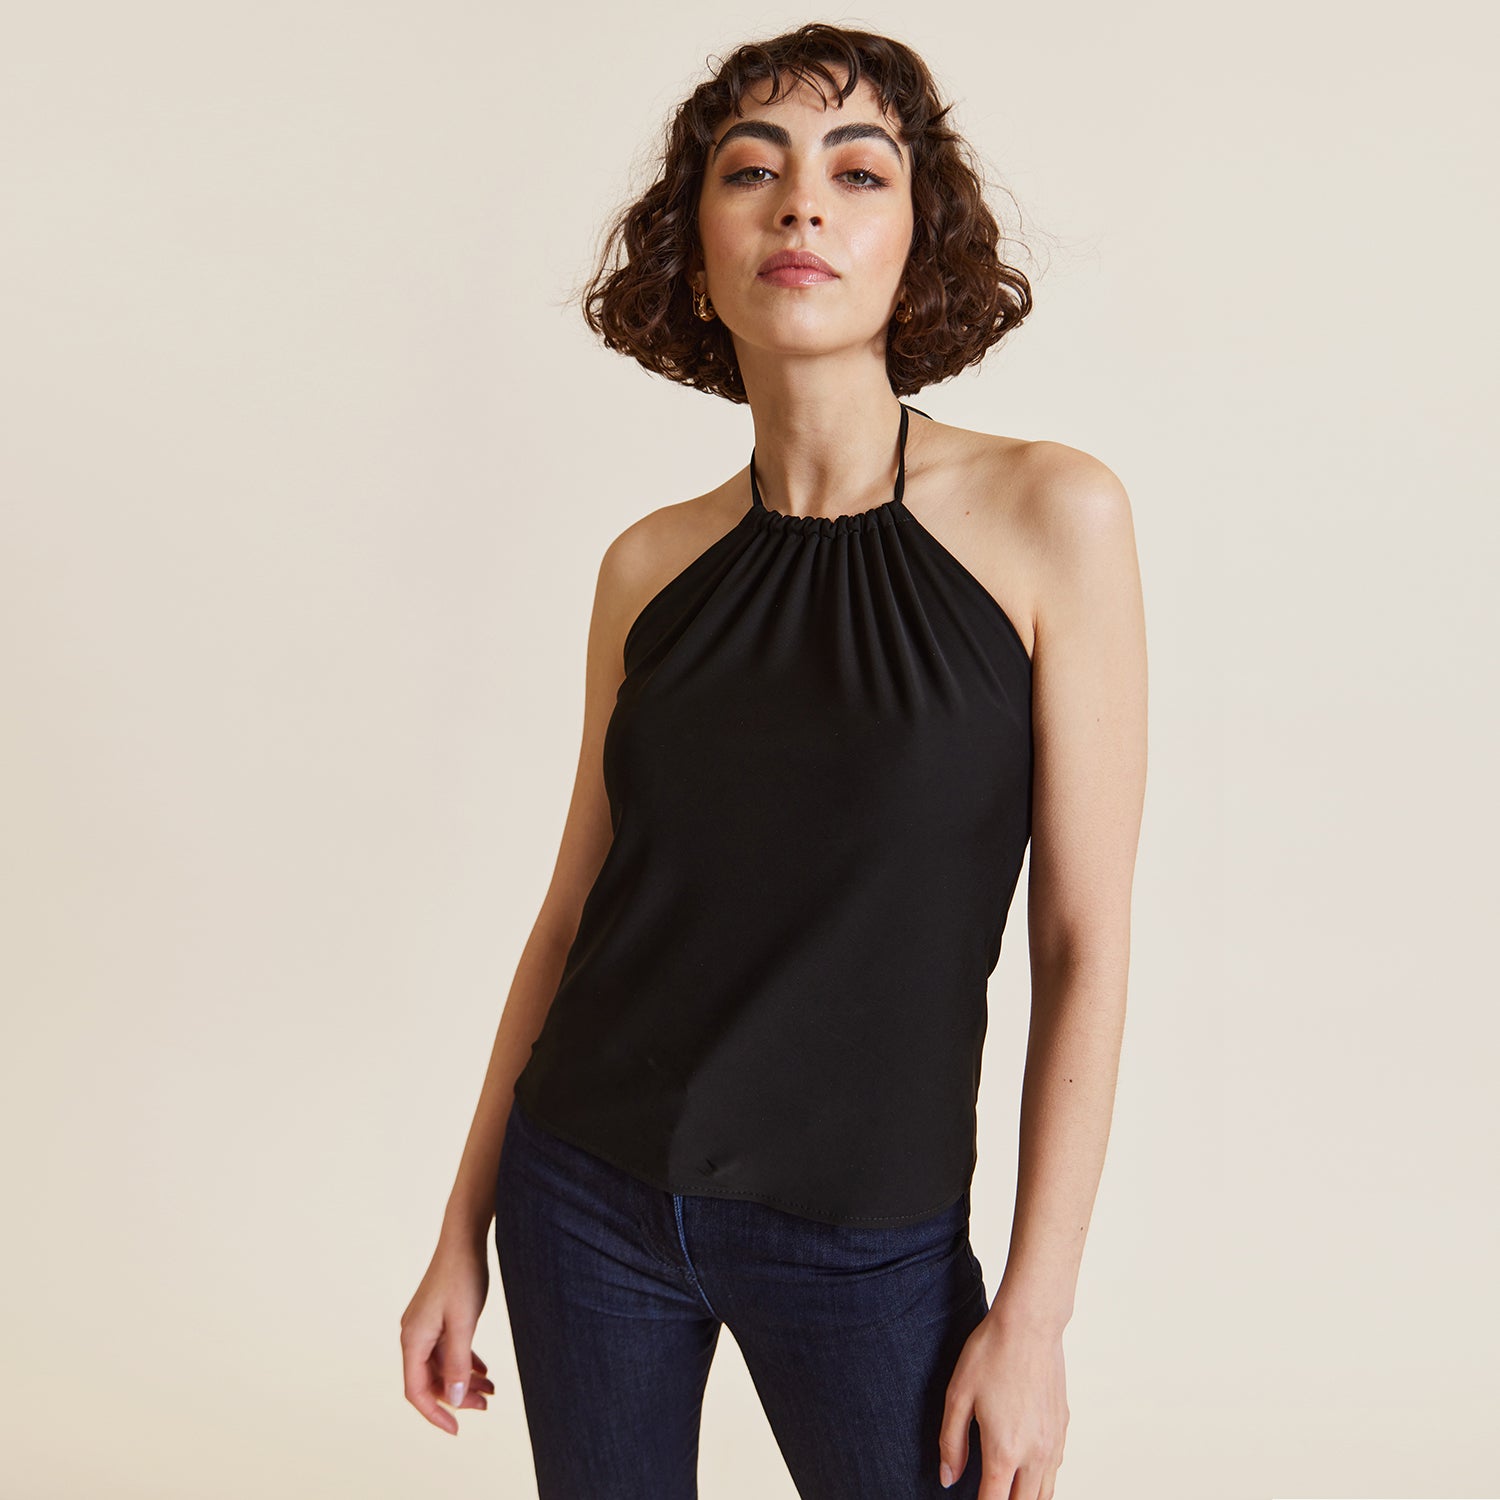 Have - Nots Black Halter Neck Top by Me&Thee